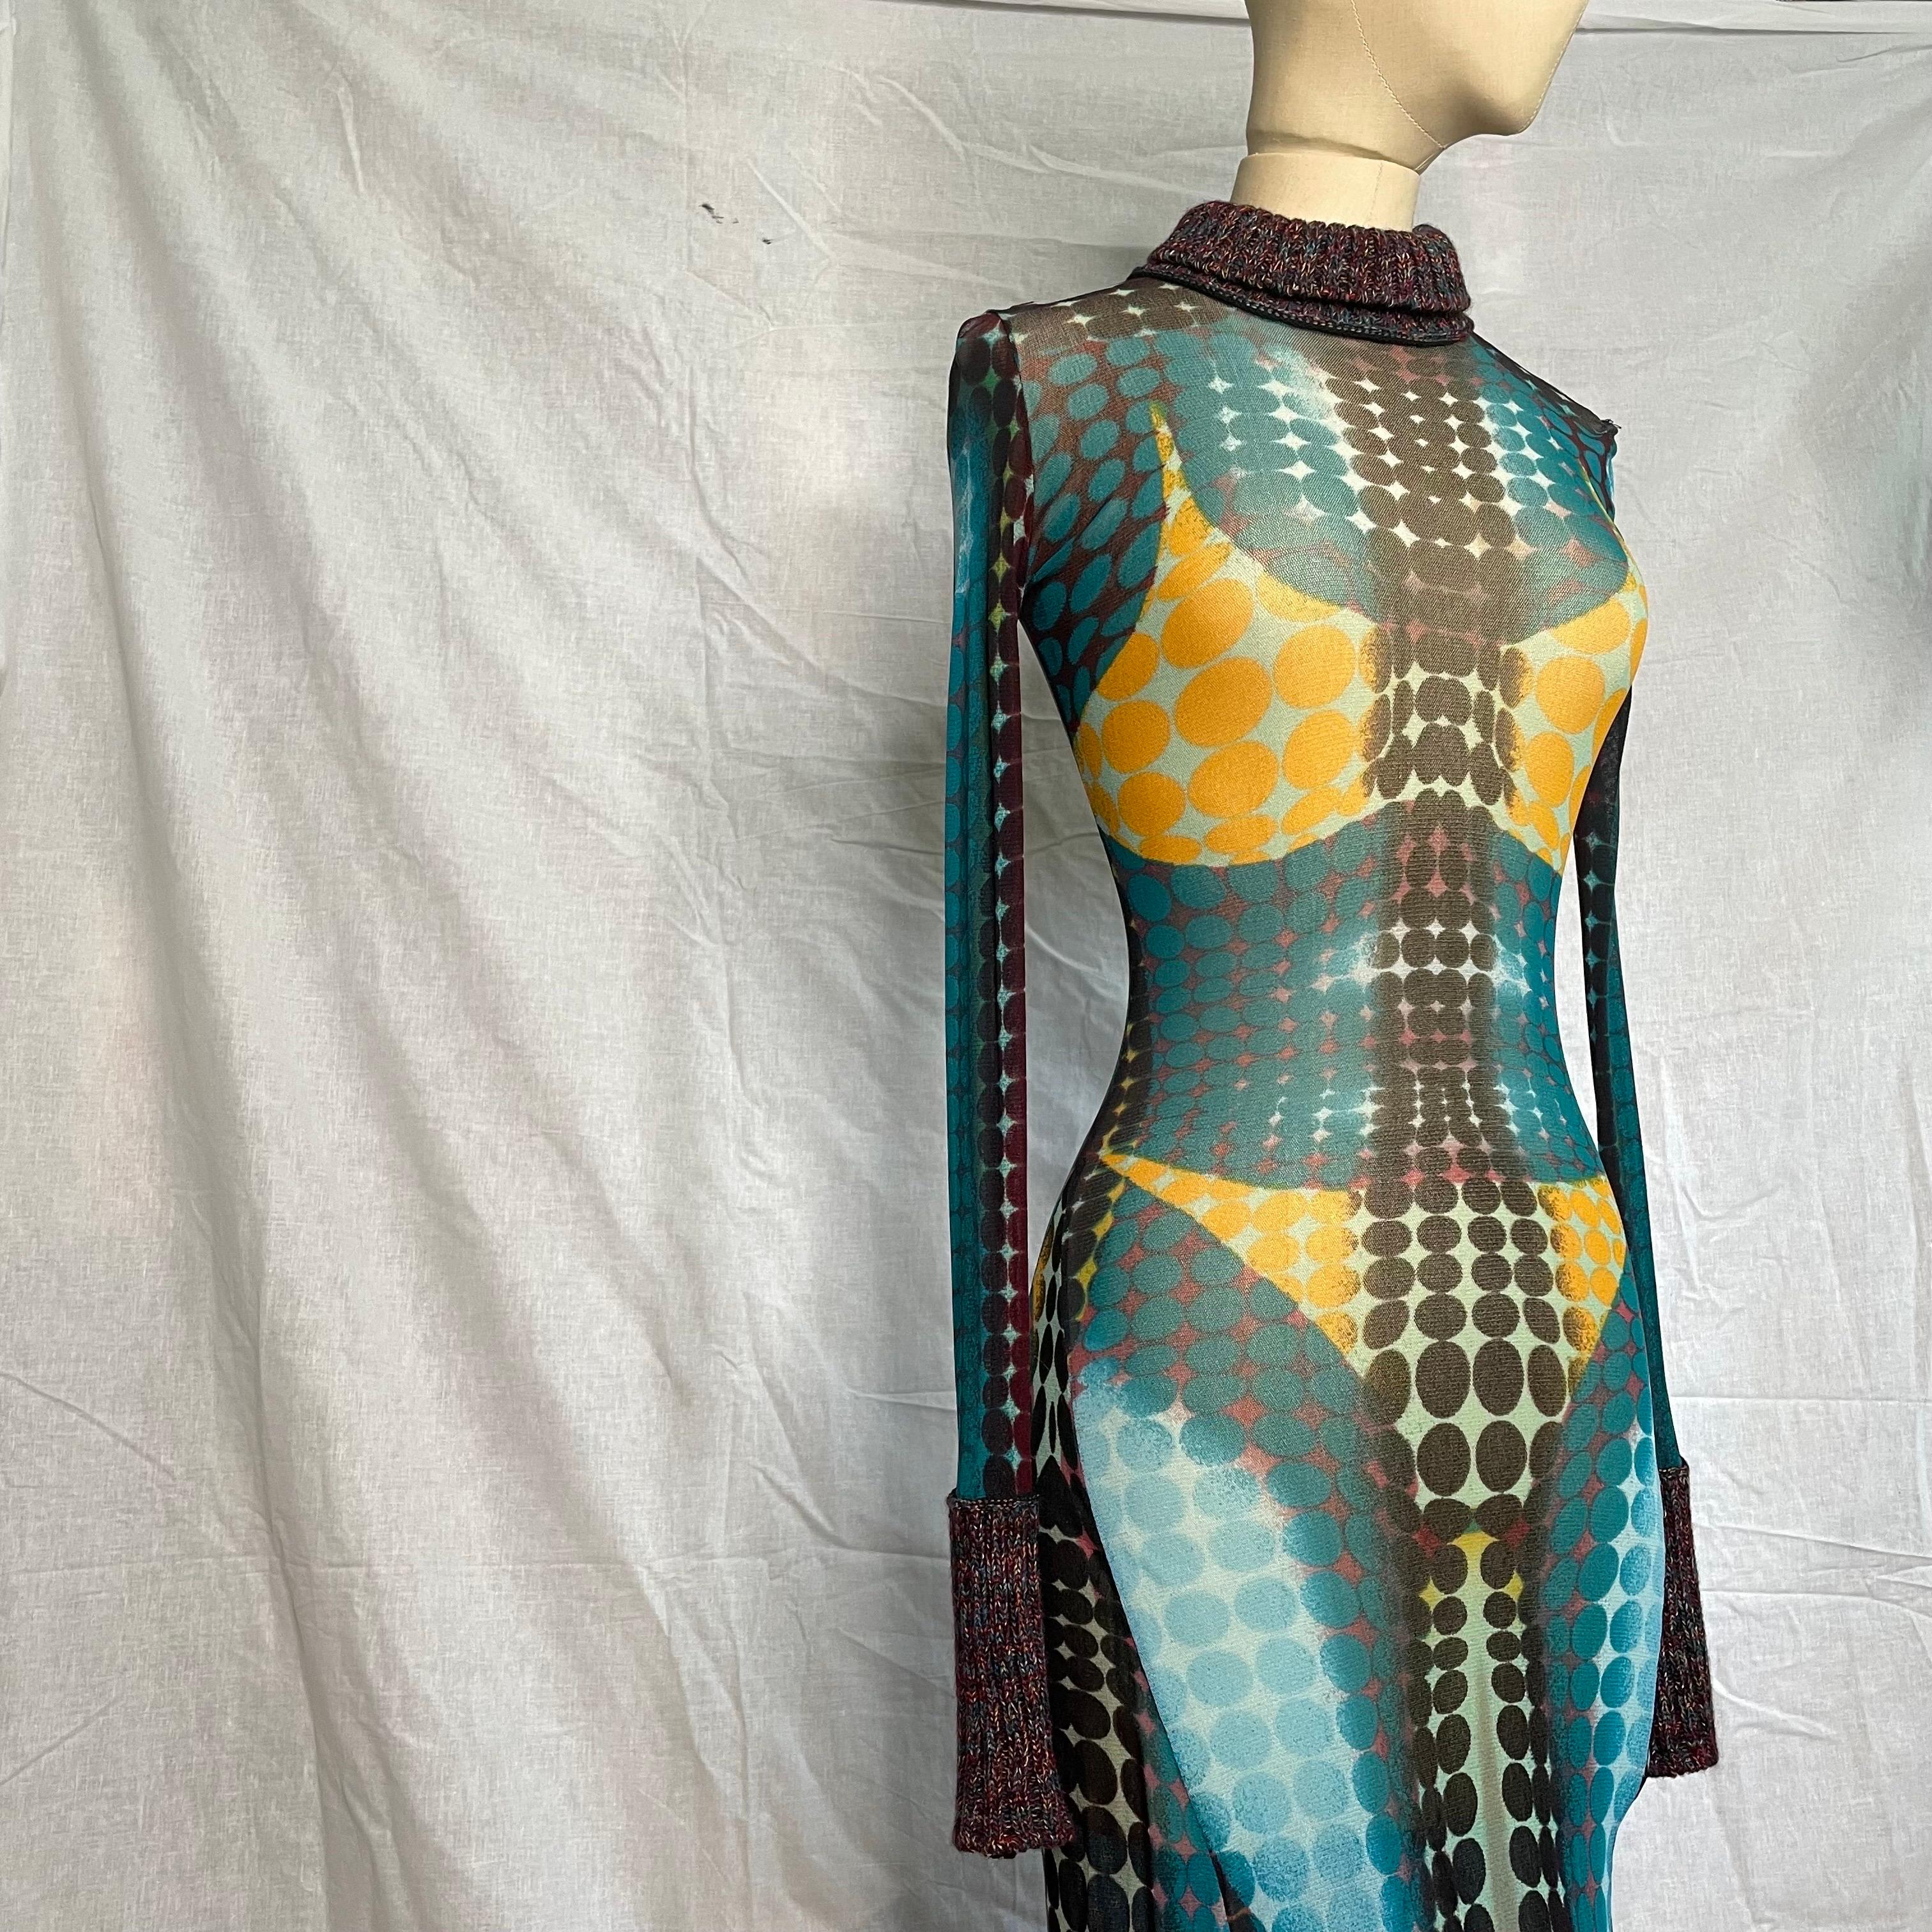 Iconic cyber dots mesh dress from Jean Paul Gaultier's fall 1995 runway collection in lycra spandex—many iconic editorials have featured this piece, and it's part of the RISD Museum's permanent collection.